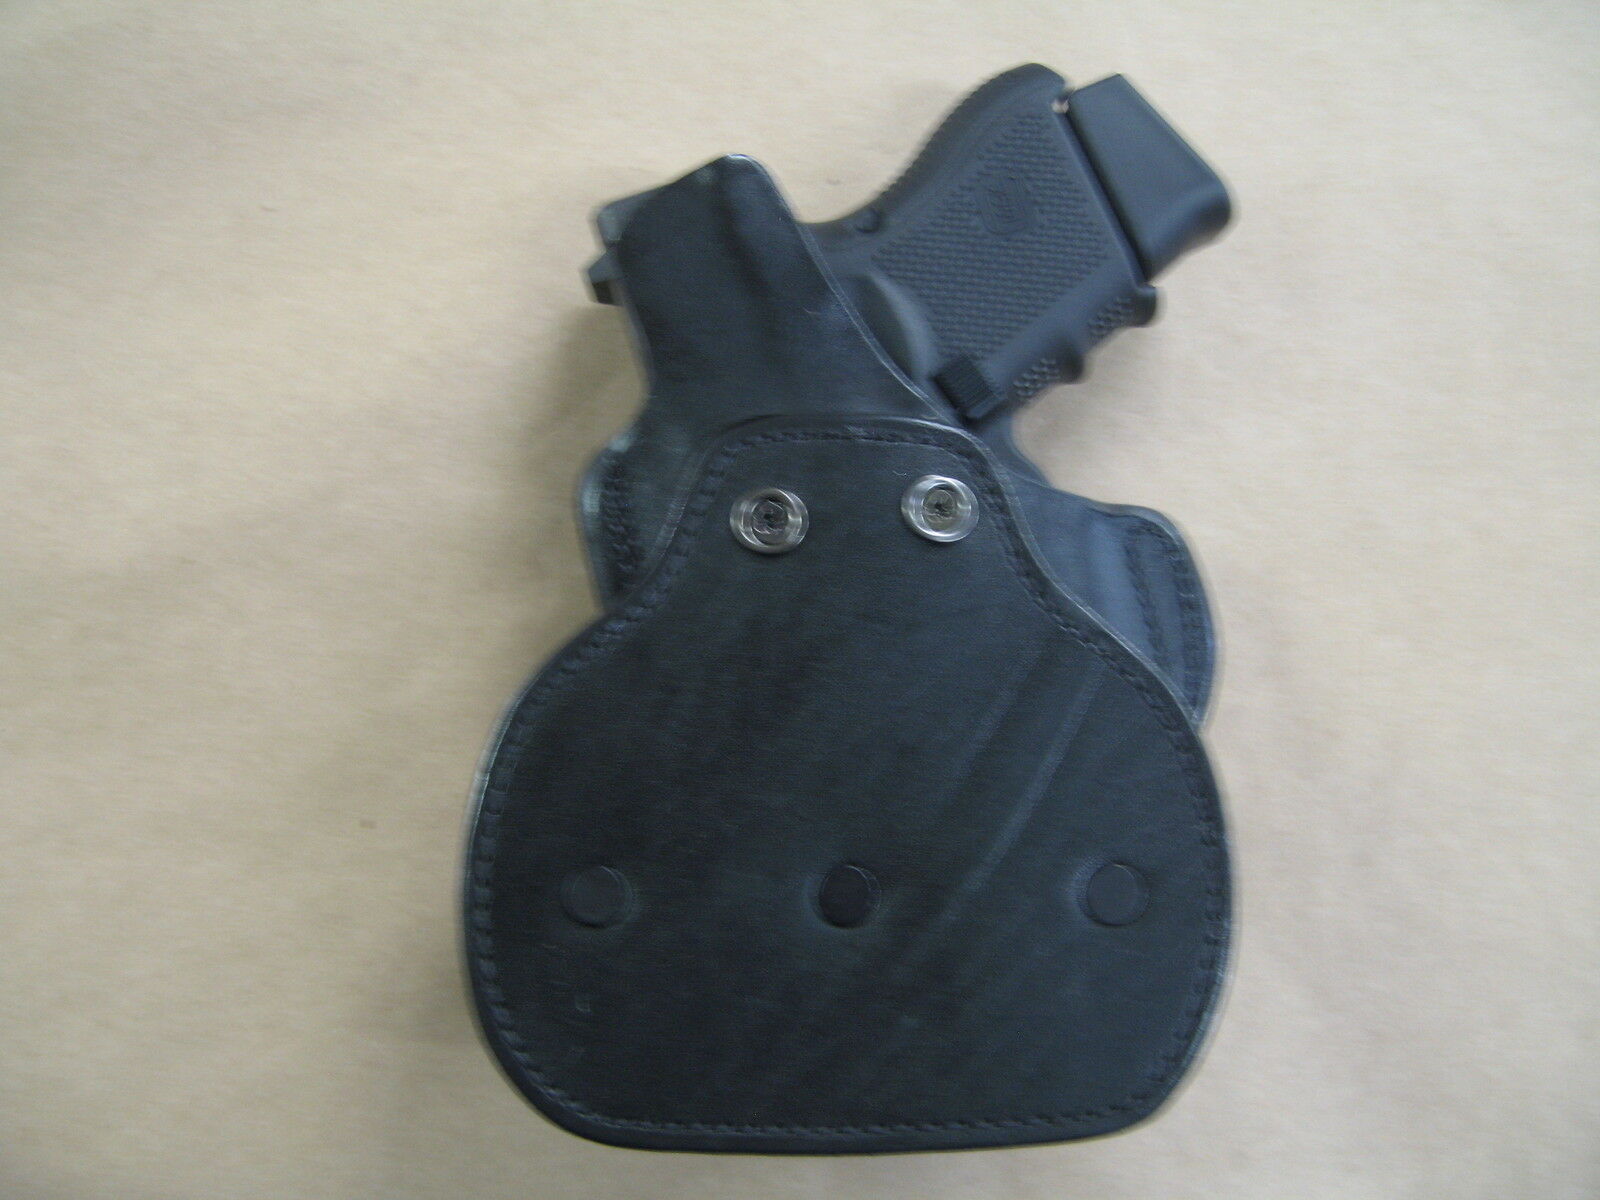 Leather OWB Paddle Holster Fits Bersa Thunder 45 Ultra Comp Pro 3.6" BBL #1067#